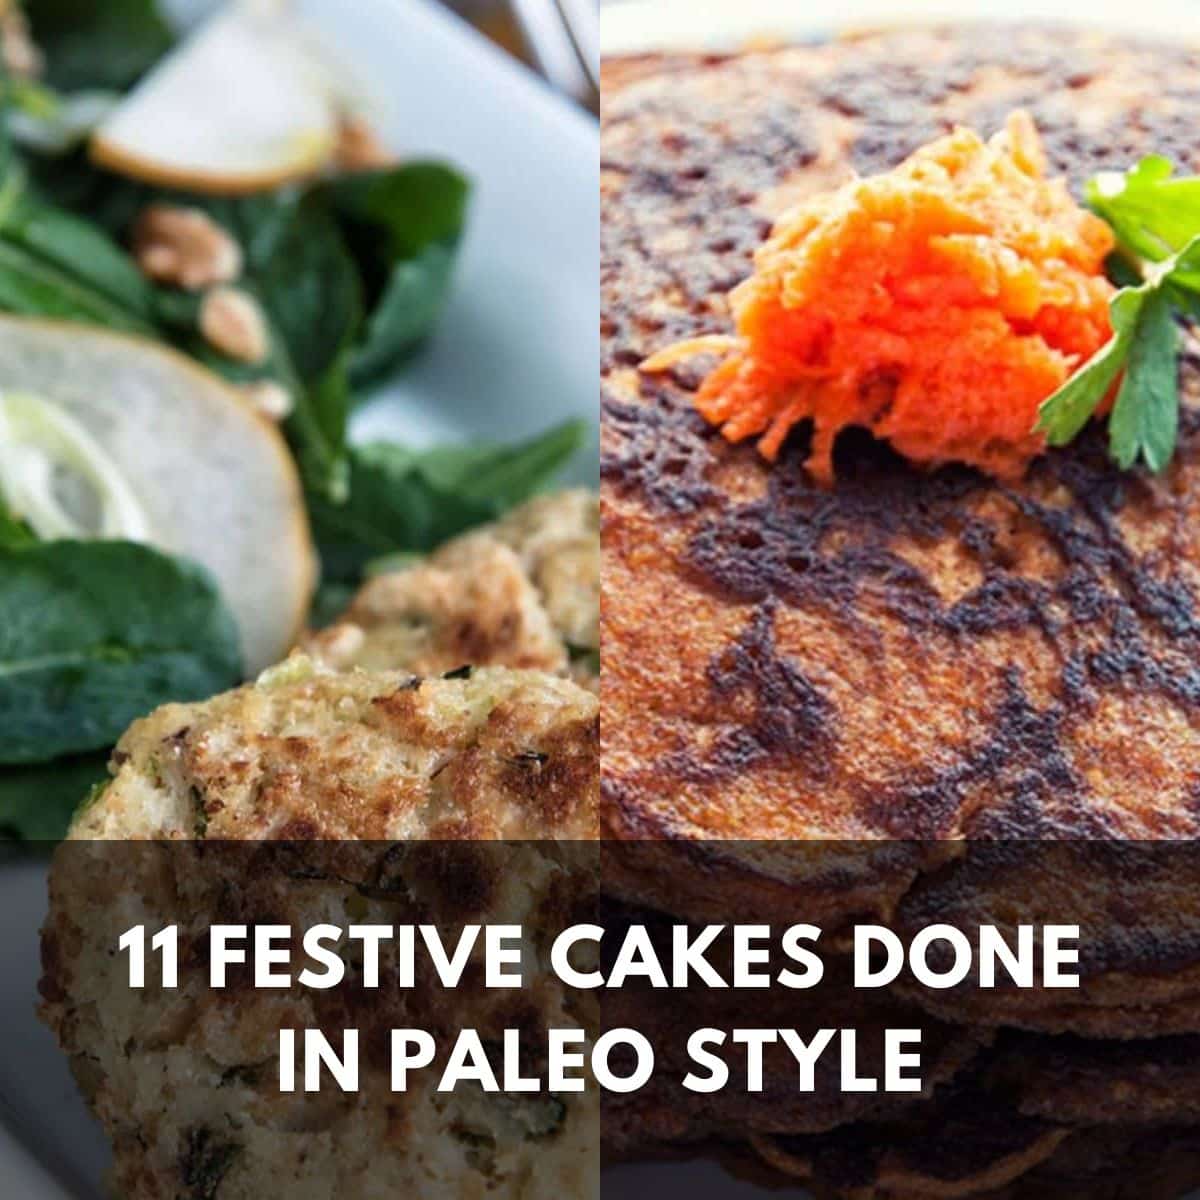 11 festive cakes done in paleo style main